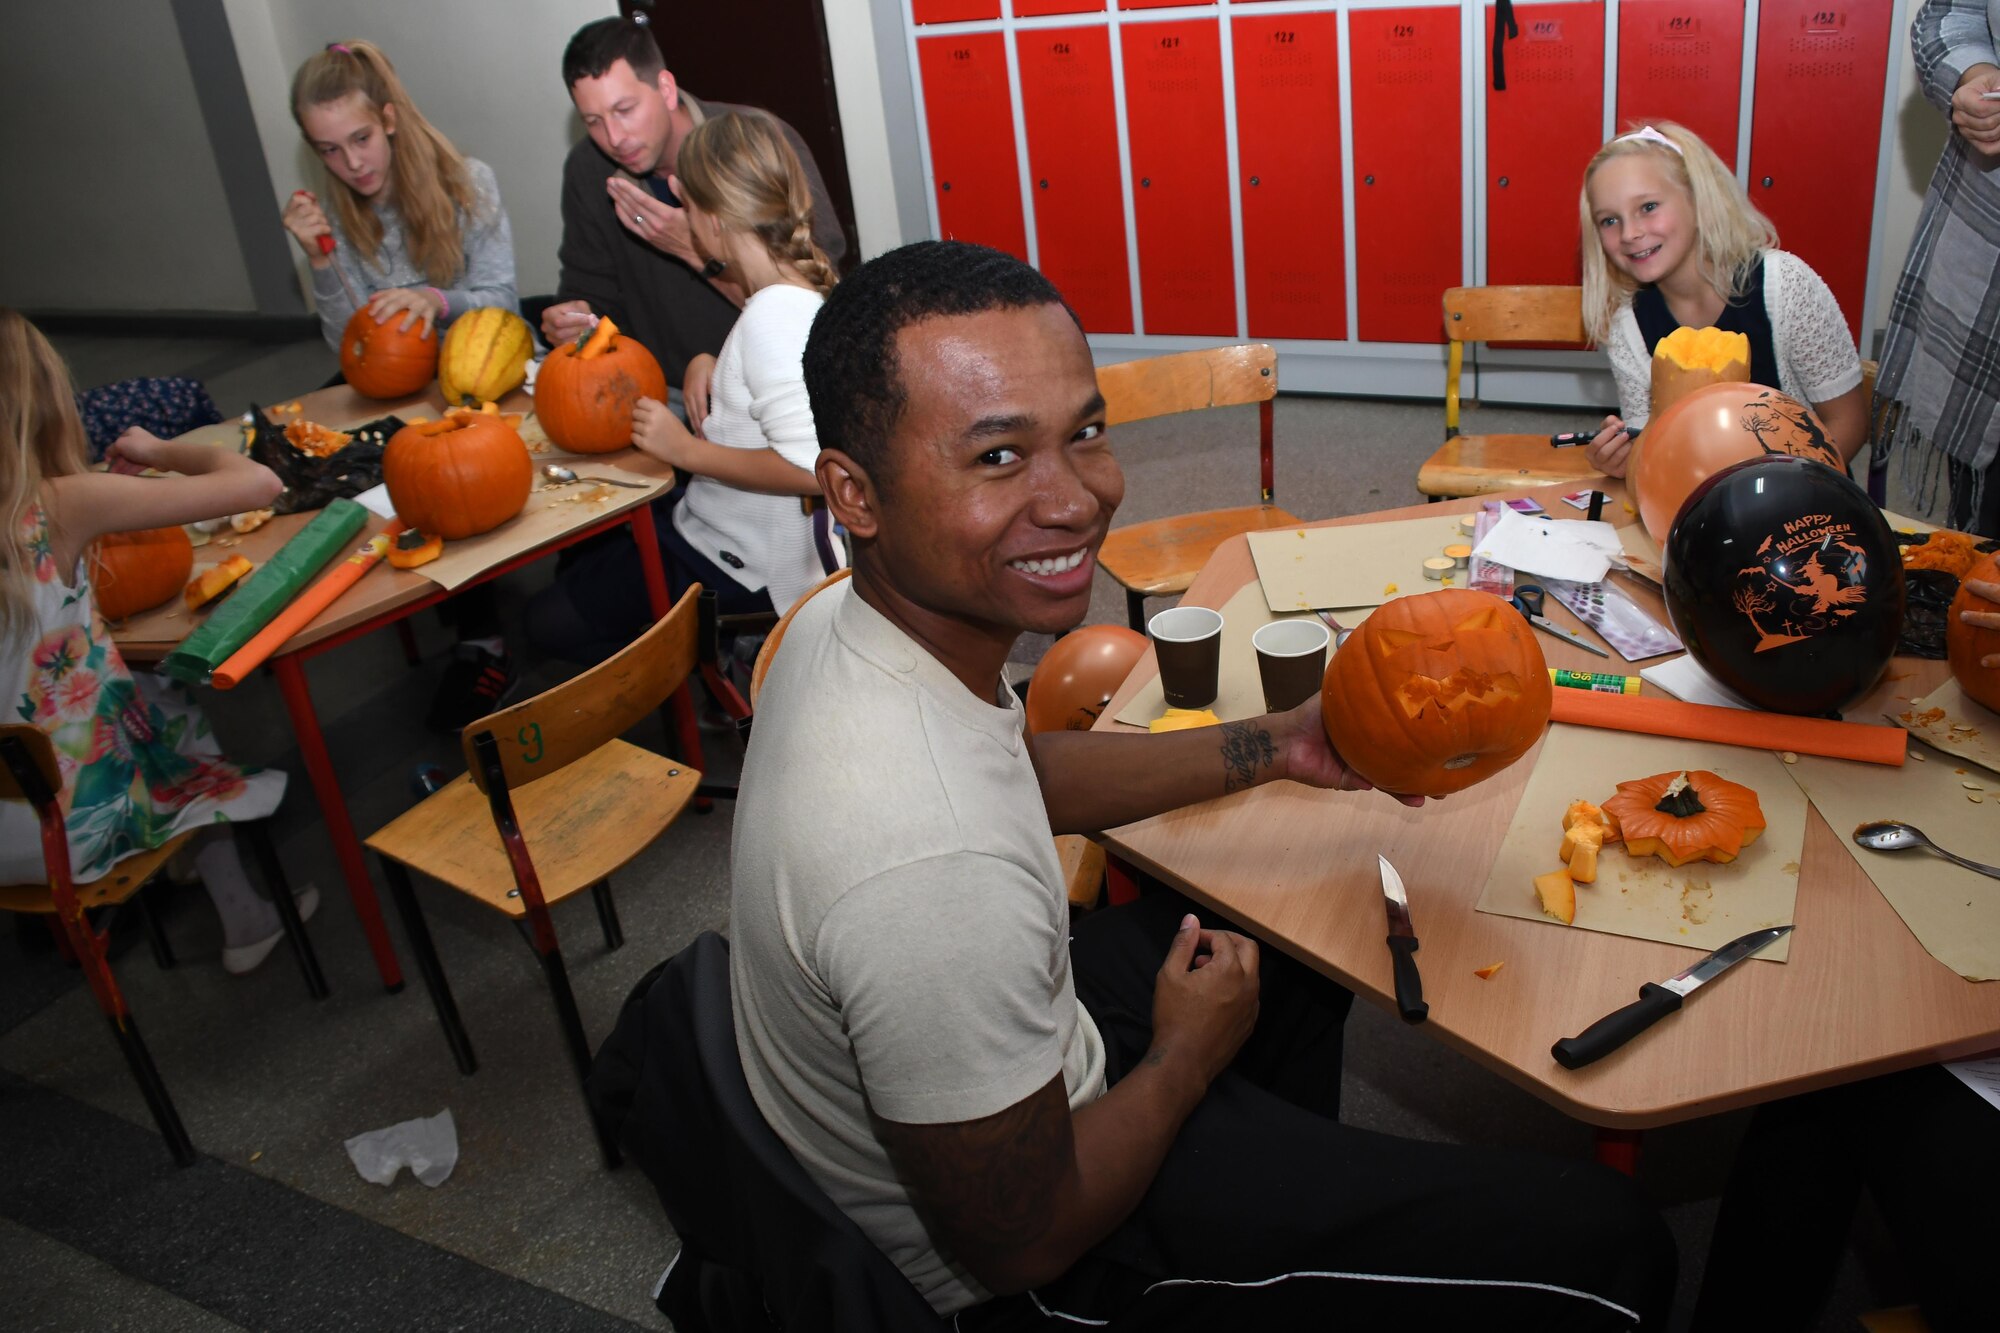 Senior Airman Arsenio Small, 86th Airlift Wing flight service center journeyman, and Staff Sgt. Michael Sterchi, 700th Airlift Squadron loadmaster, carve pumpkins with students at Elementary School No. Nine in Gniezno, Poland, Oct. 19, 2016. Pumpkin carving was one of several activities the Airmen participated in during a cultural orientation visit to the school while working with the Polish air force during Aviation Detachment 17-1 in support of Operation Atlantic Resolve. (U.S. Air Force photo by Staff Sgt. Alan Abernethy)